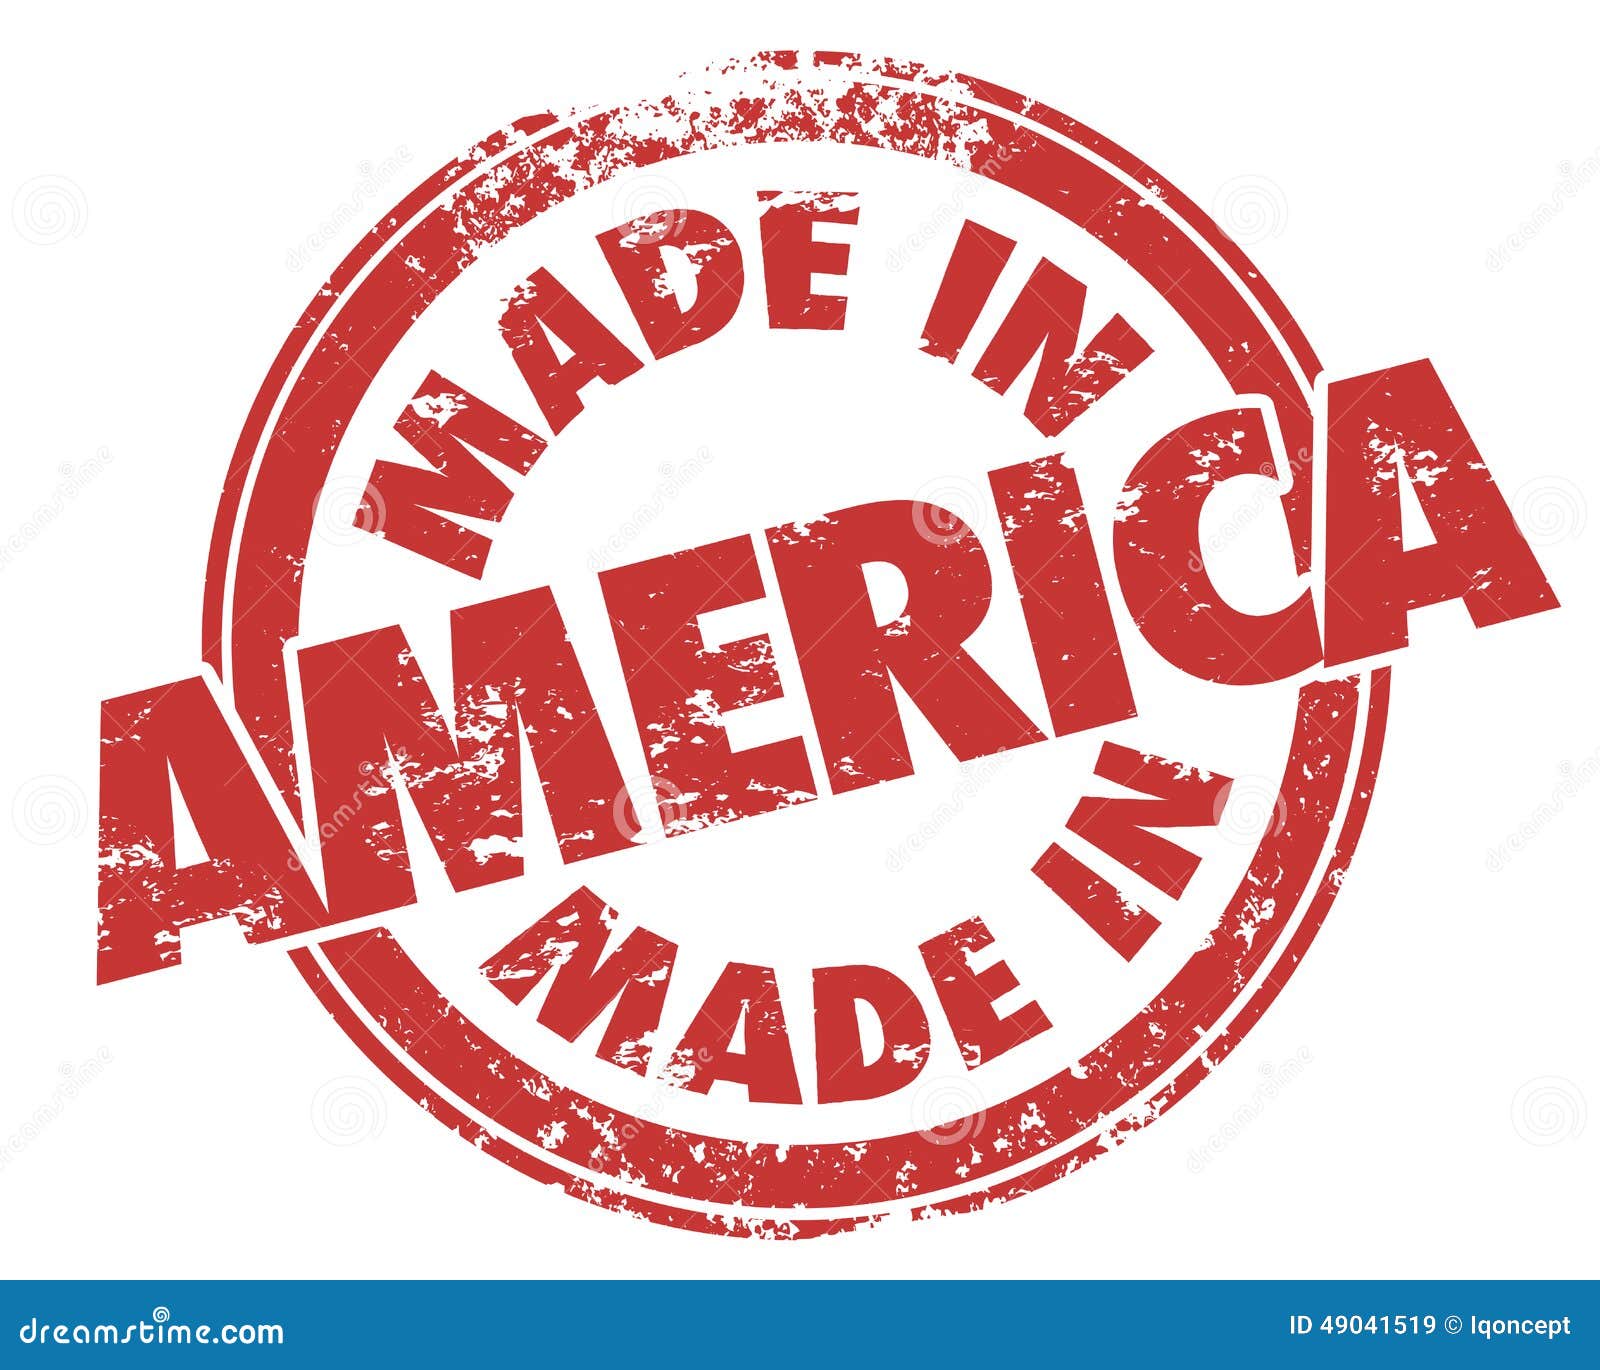 made in usa clip art free - photo #26